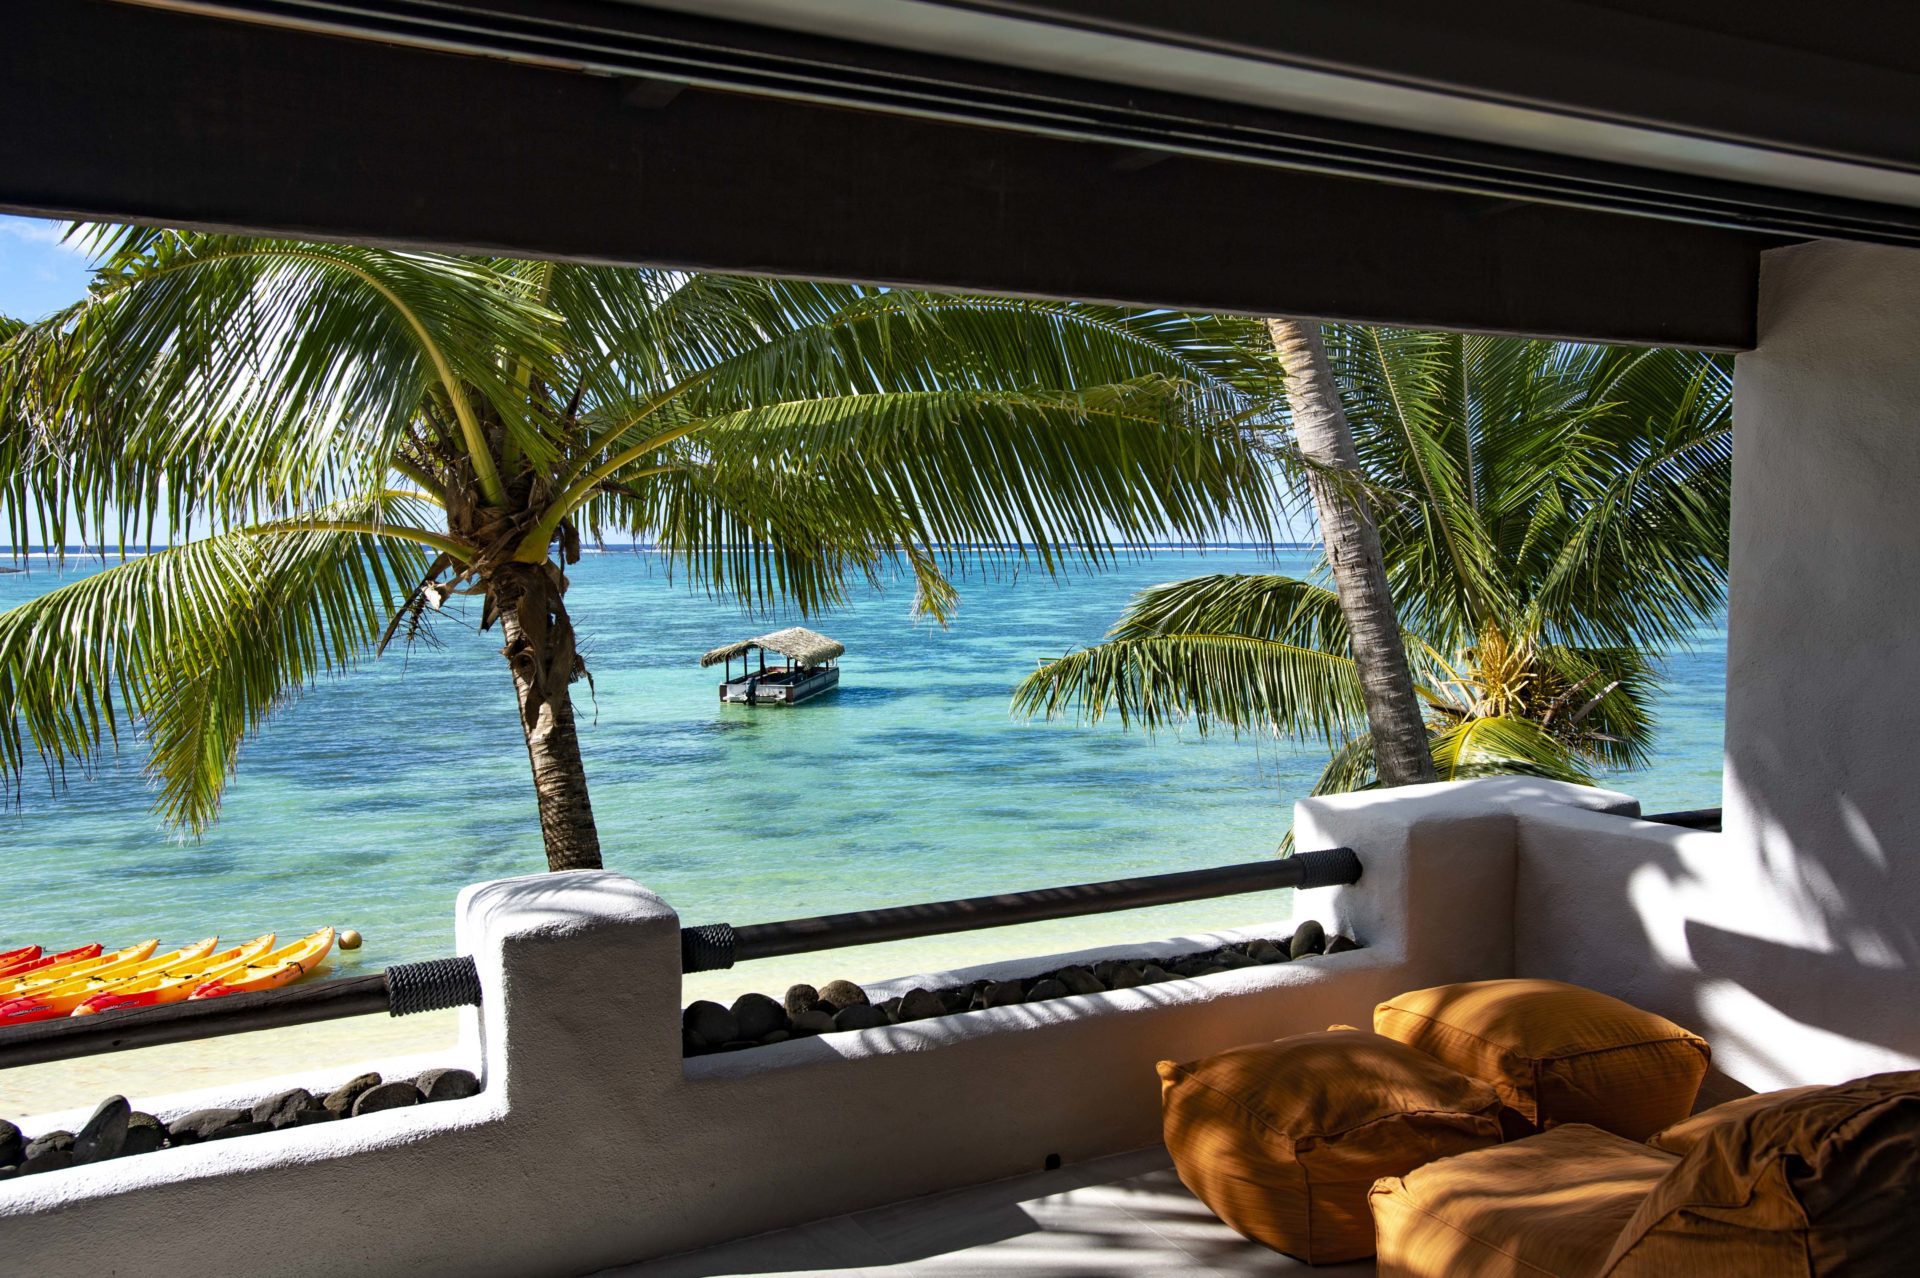 A close up view of the lagoon from the Premium Beachfront Suite private balcony, overlooking trimmed coconut palms that sway in the breeze on a tropical beach